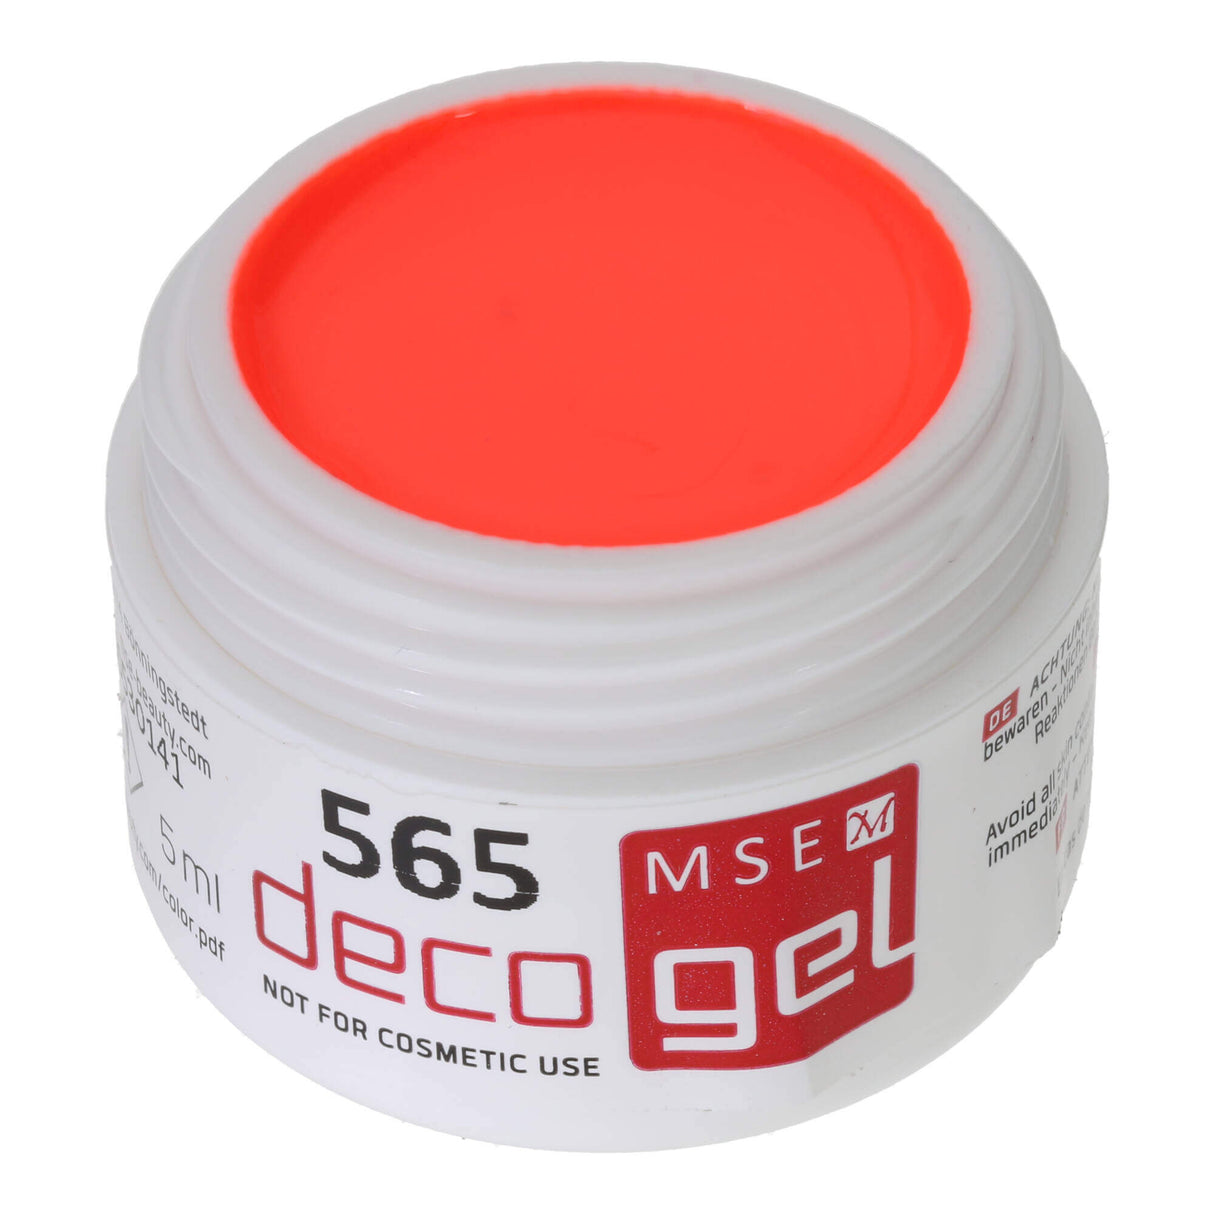 # 565 Premium DECO Color Gel 5ml Neon NOT FOR COSMETIC USE